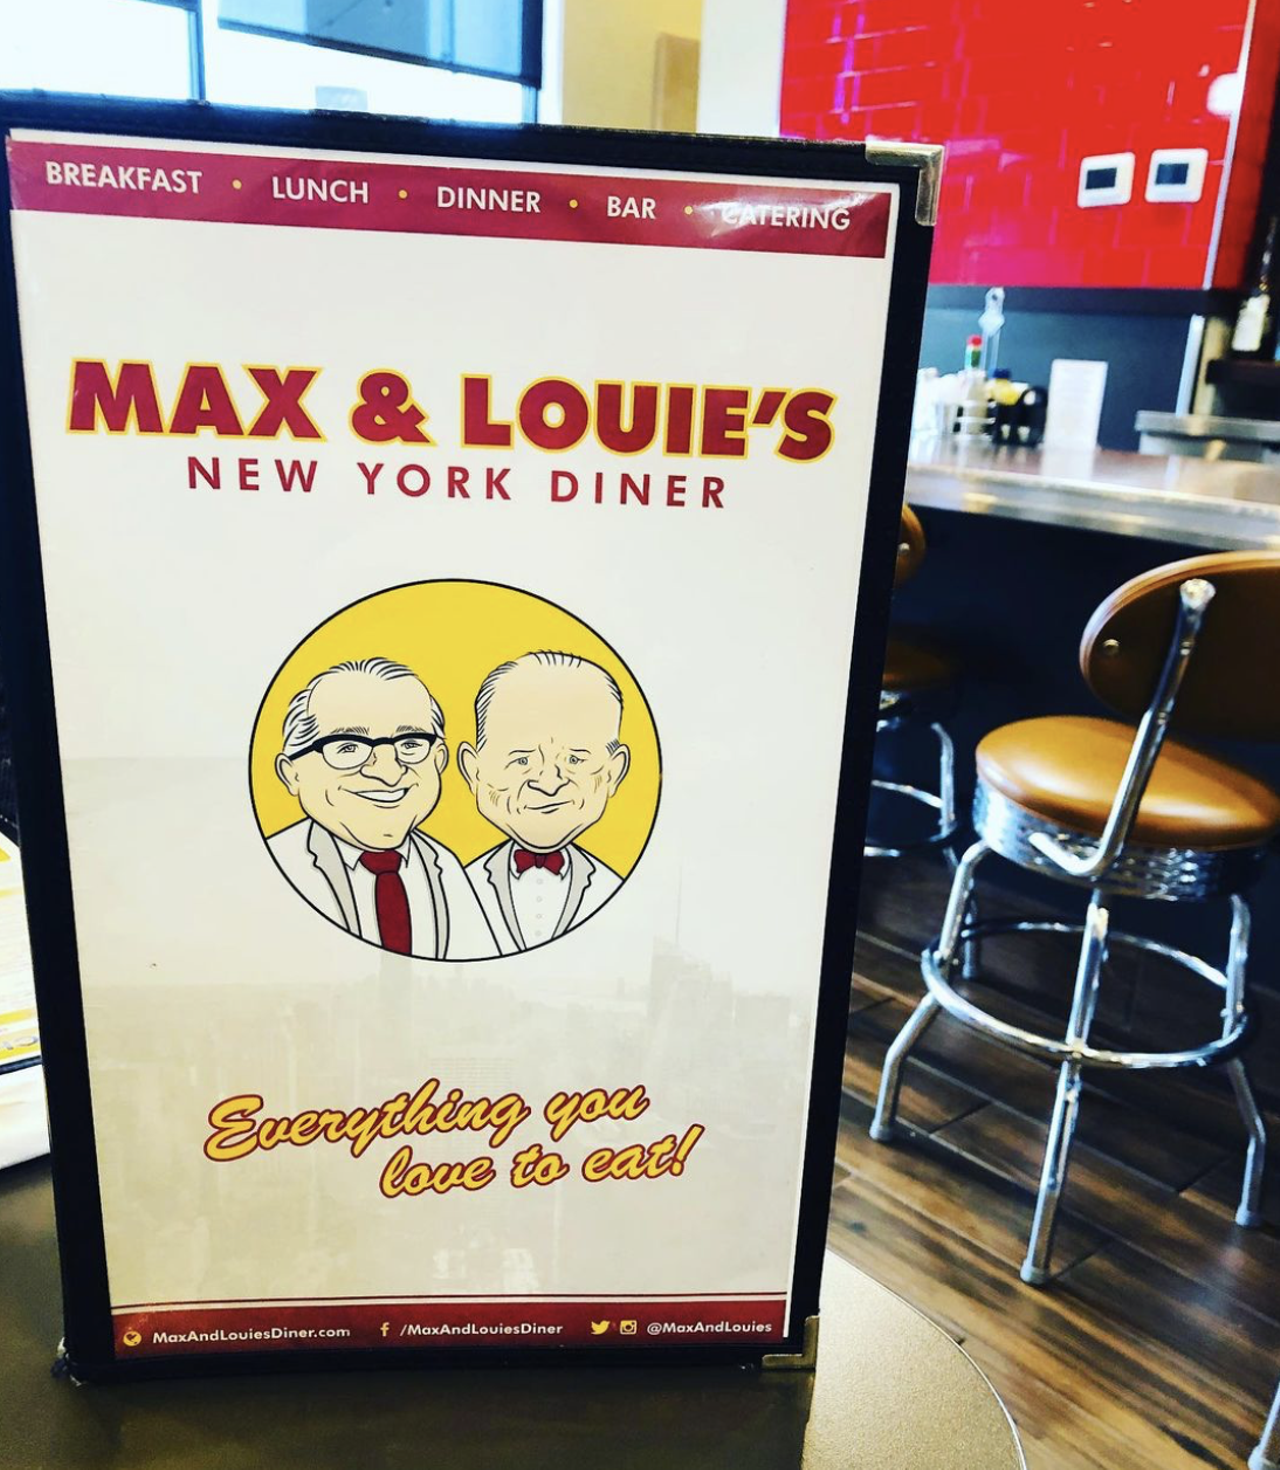 Max & Louie's New York Diner
226 W Bitters Rd Suite 126, (210) 483-7600, maxandlouiesdiner.com
Challah bread stuffing? Yes, please! Max & Louie’s is offering up a killer feast for five to six people that includes roasted turkey, sides and a dessert for under $200. Order by November 19 for pickup on the 25. 
Photo via Instagram / airingmylaundry